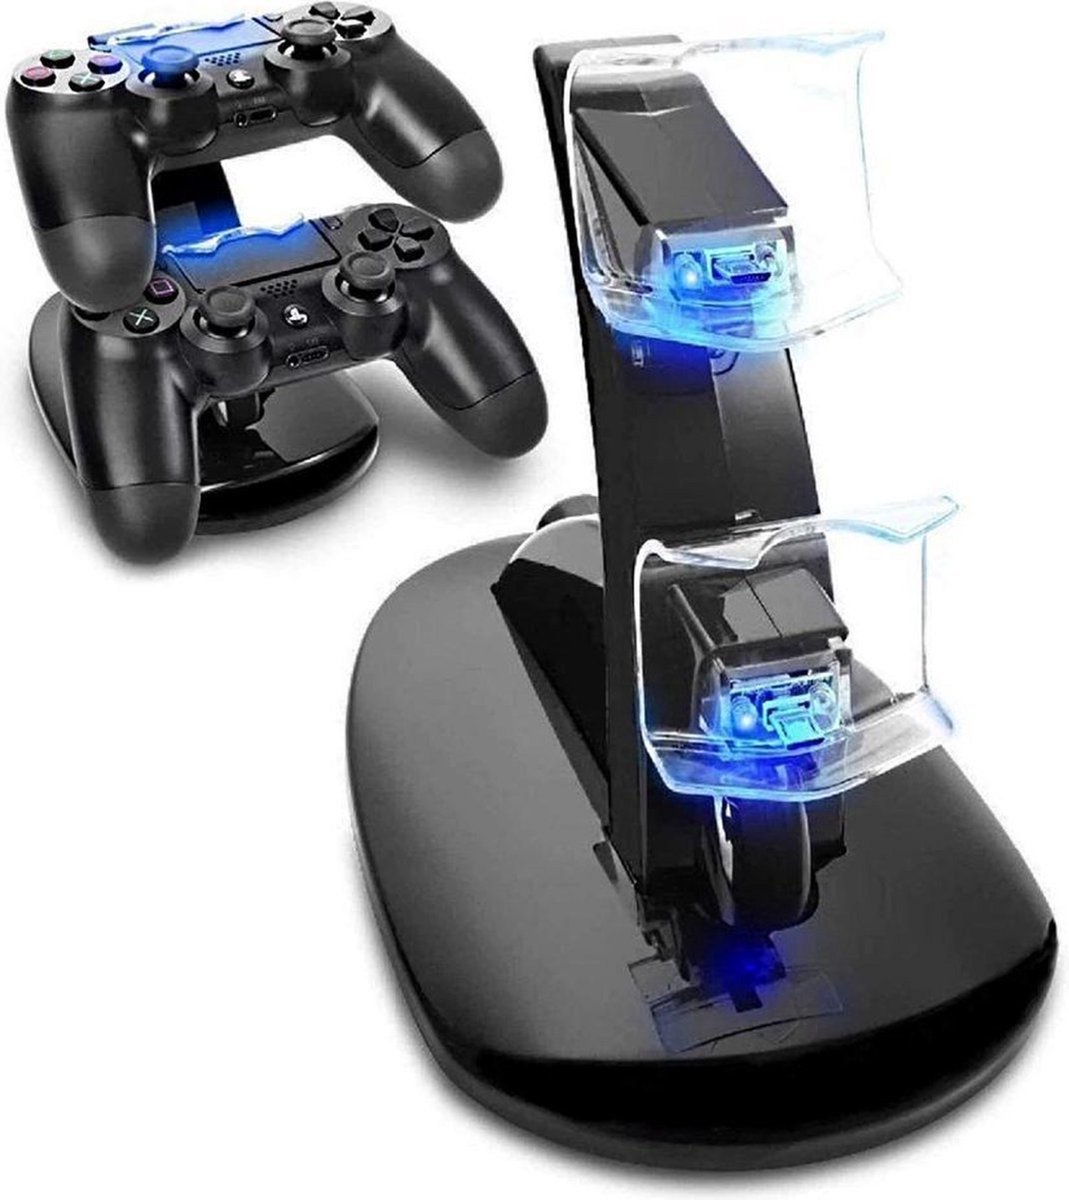 S&C - Controller Dock Charger Oplaad Station Voor ps4 playstation 4 controller - USB Docking Op Laadkabel - Laadstation